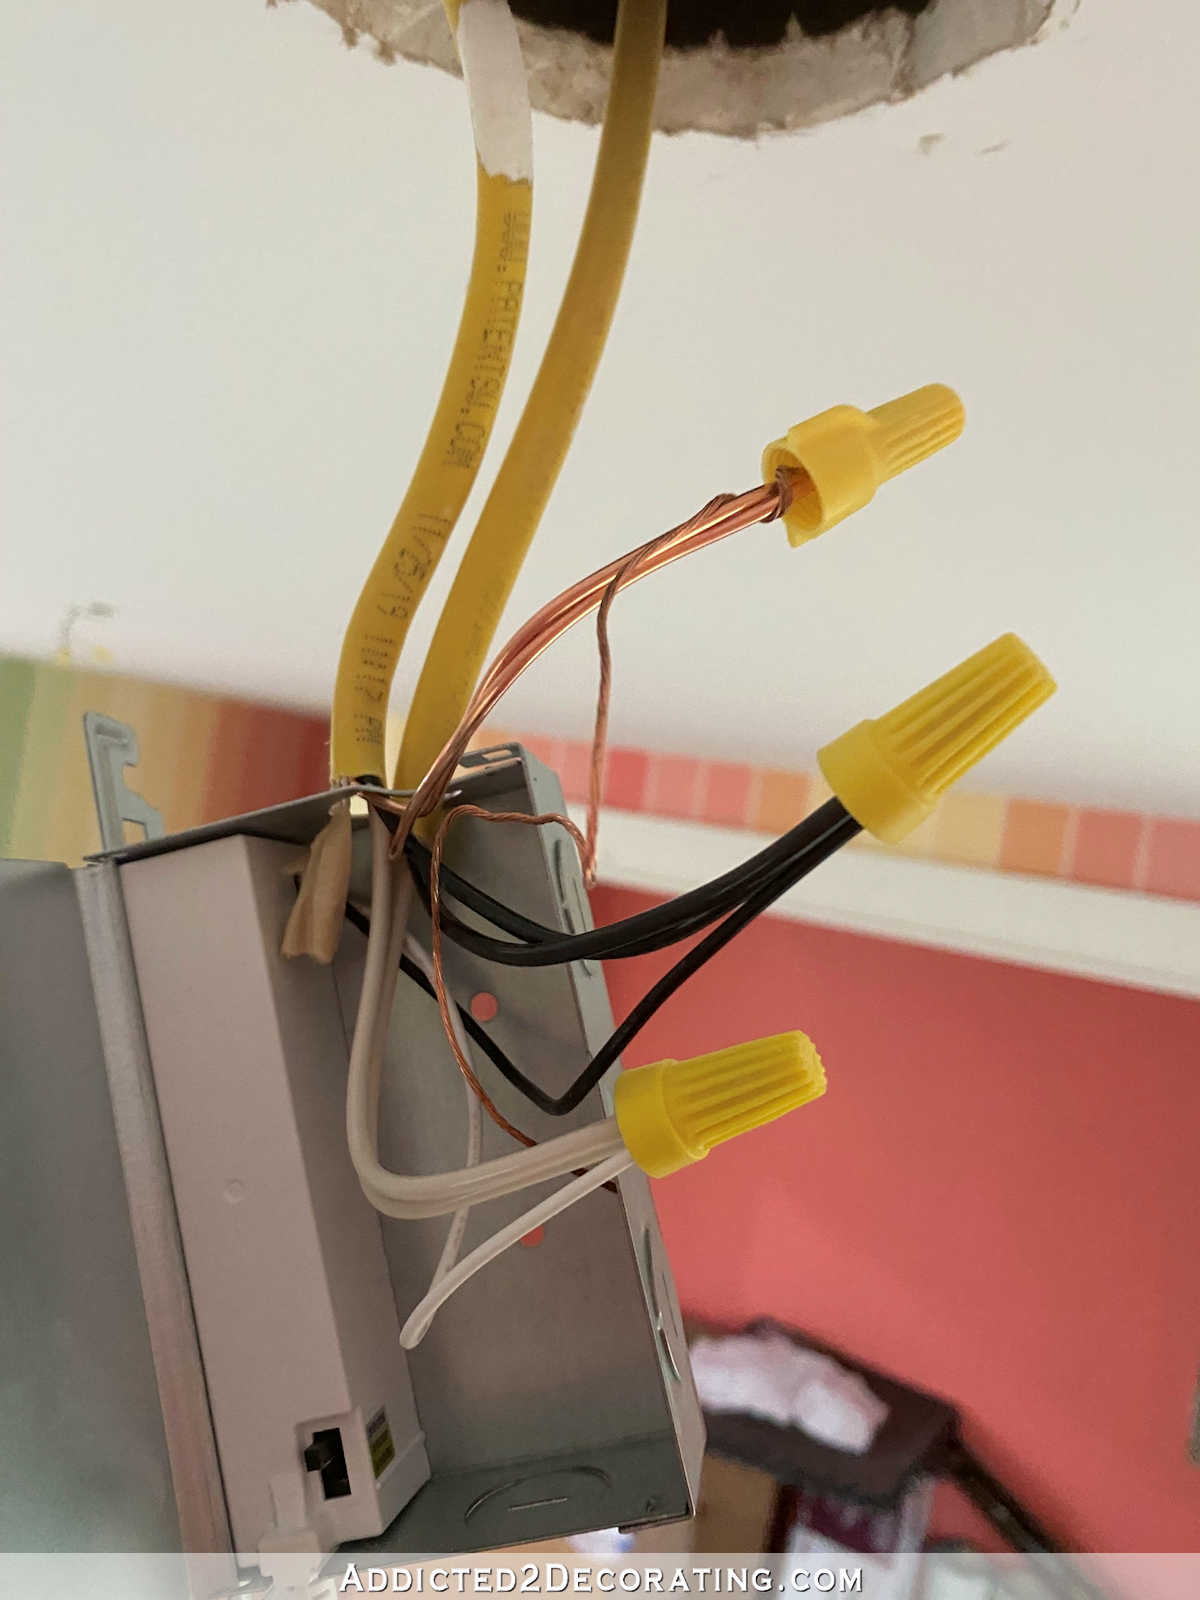 connect wires from ceiling to wires from light to install canless recessed light